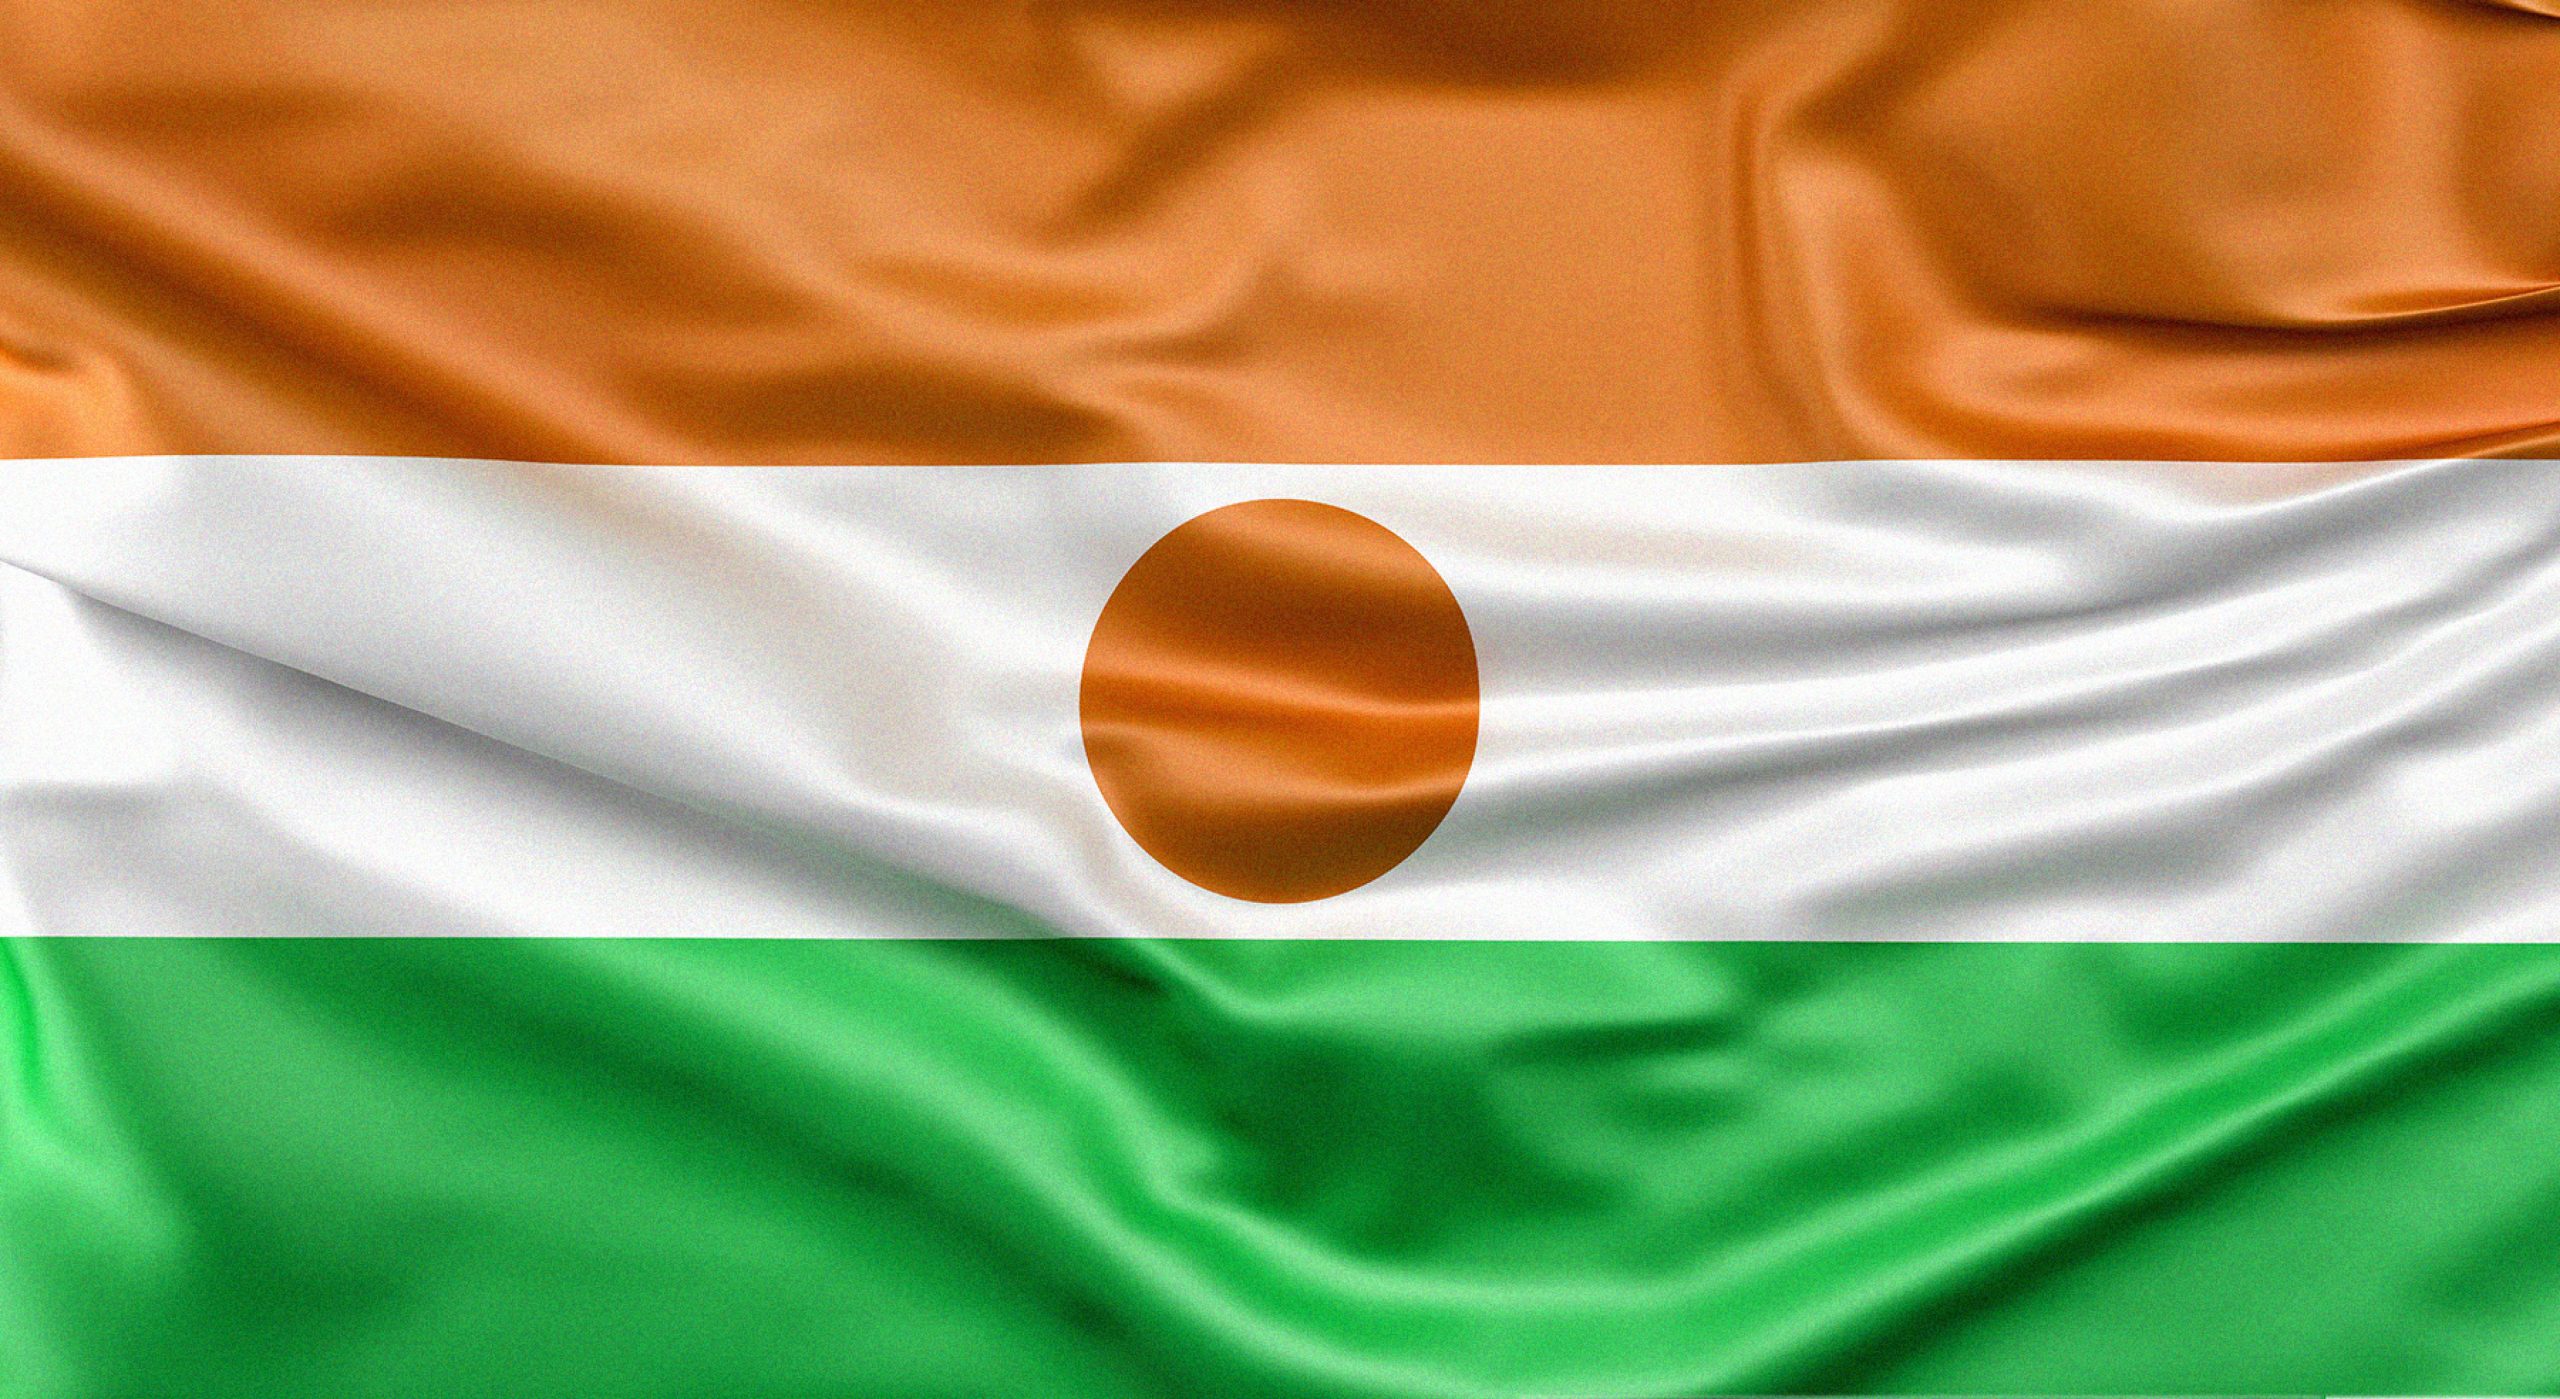 A stylized image of the flag of Niger